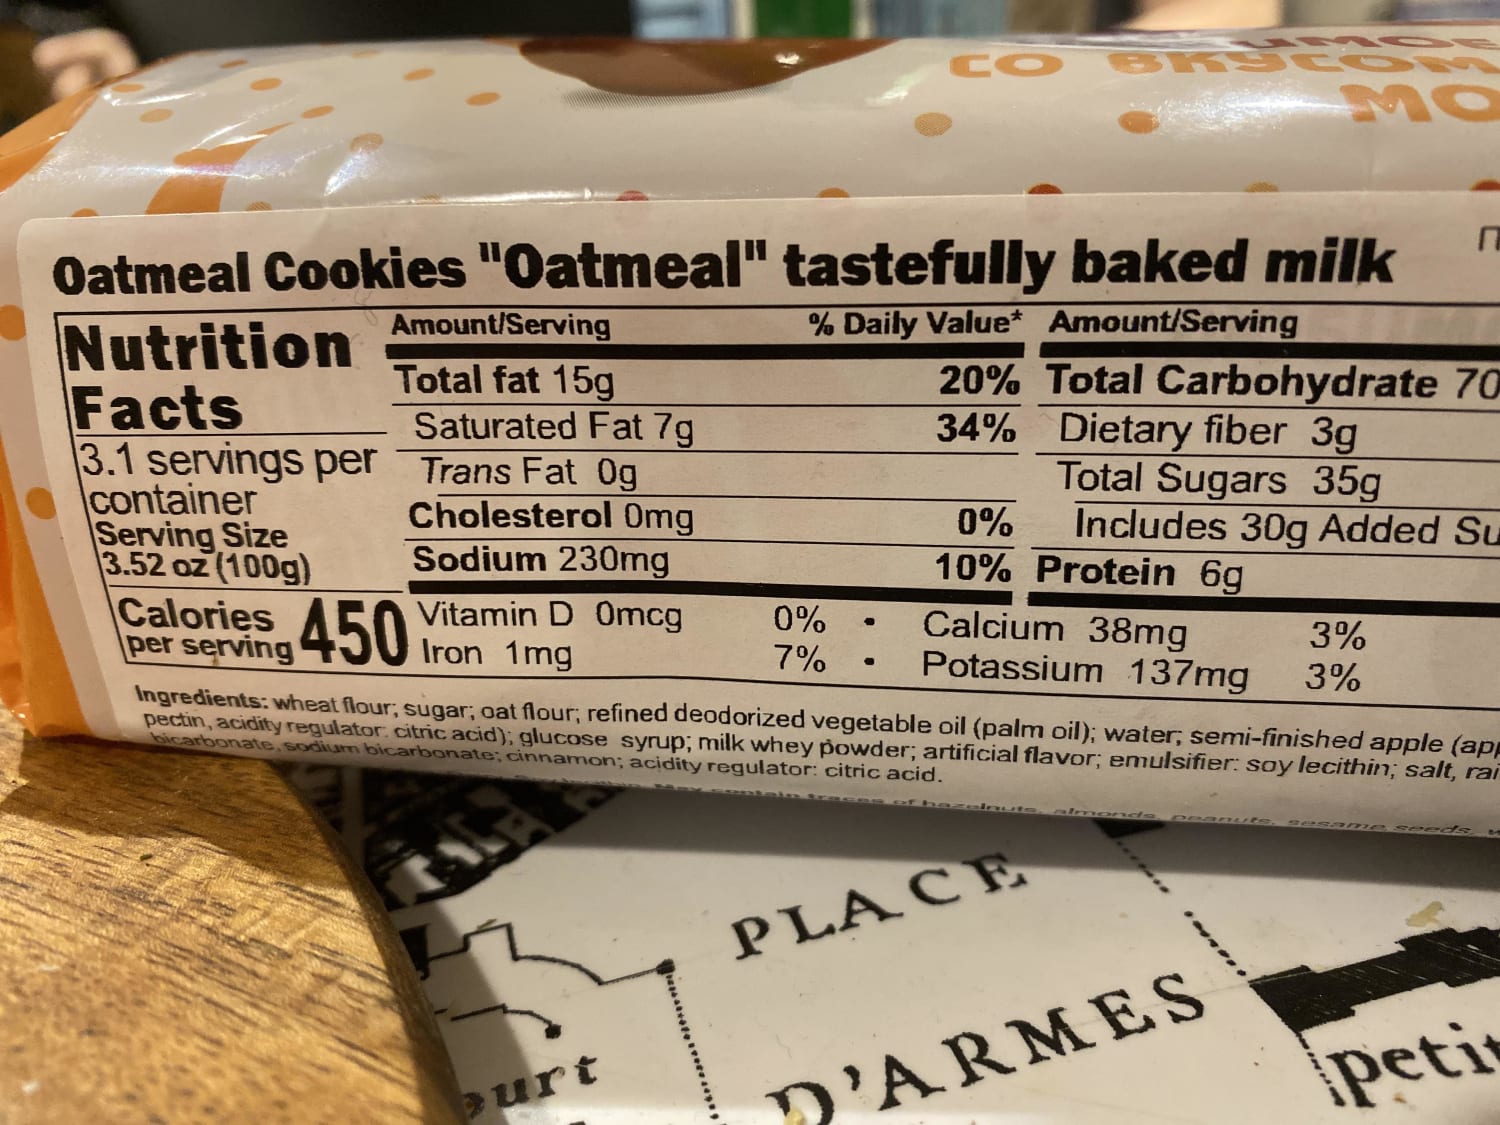 “Oatmeal Cookies “Oatmeal” with tastefully baked milk” (What great translation!)